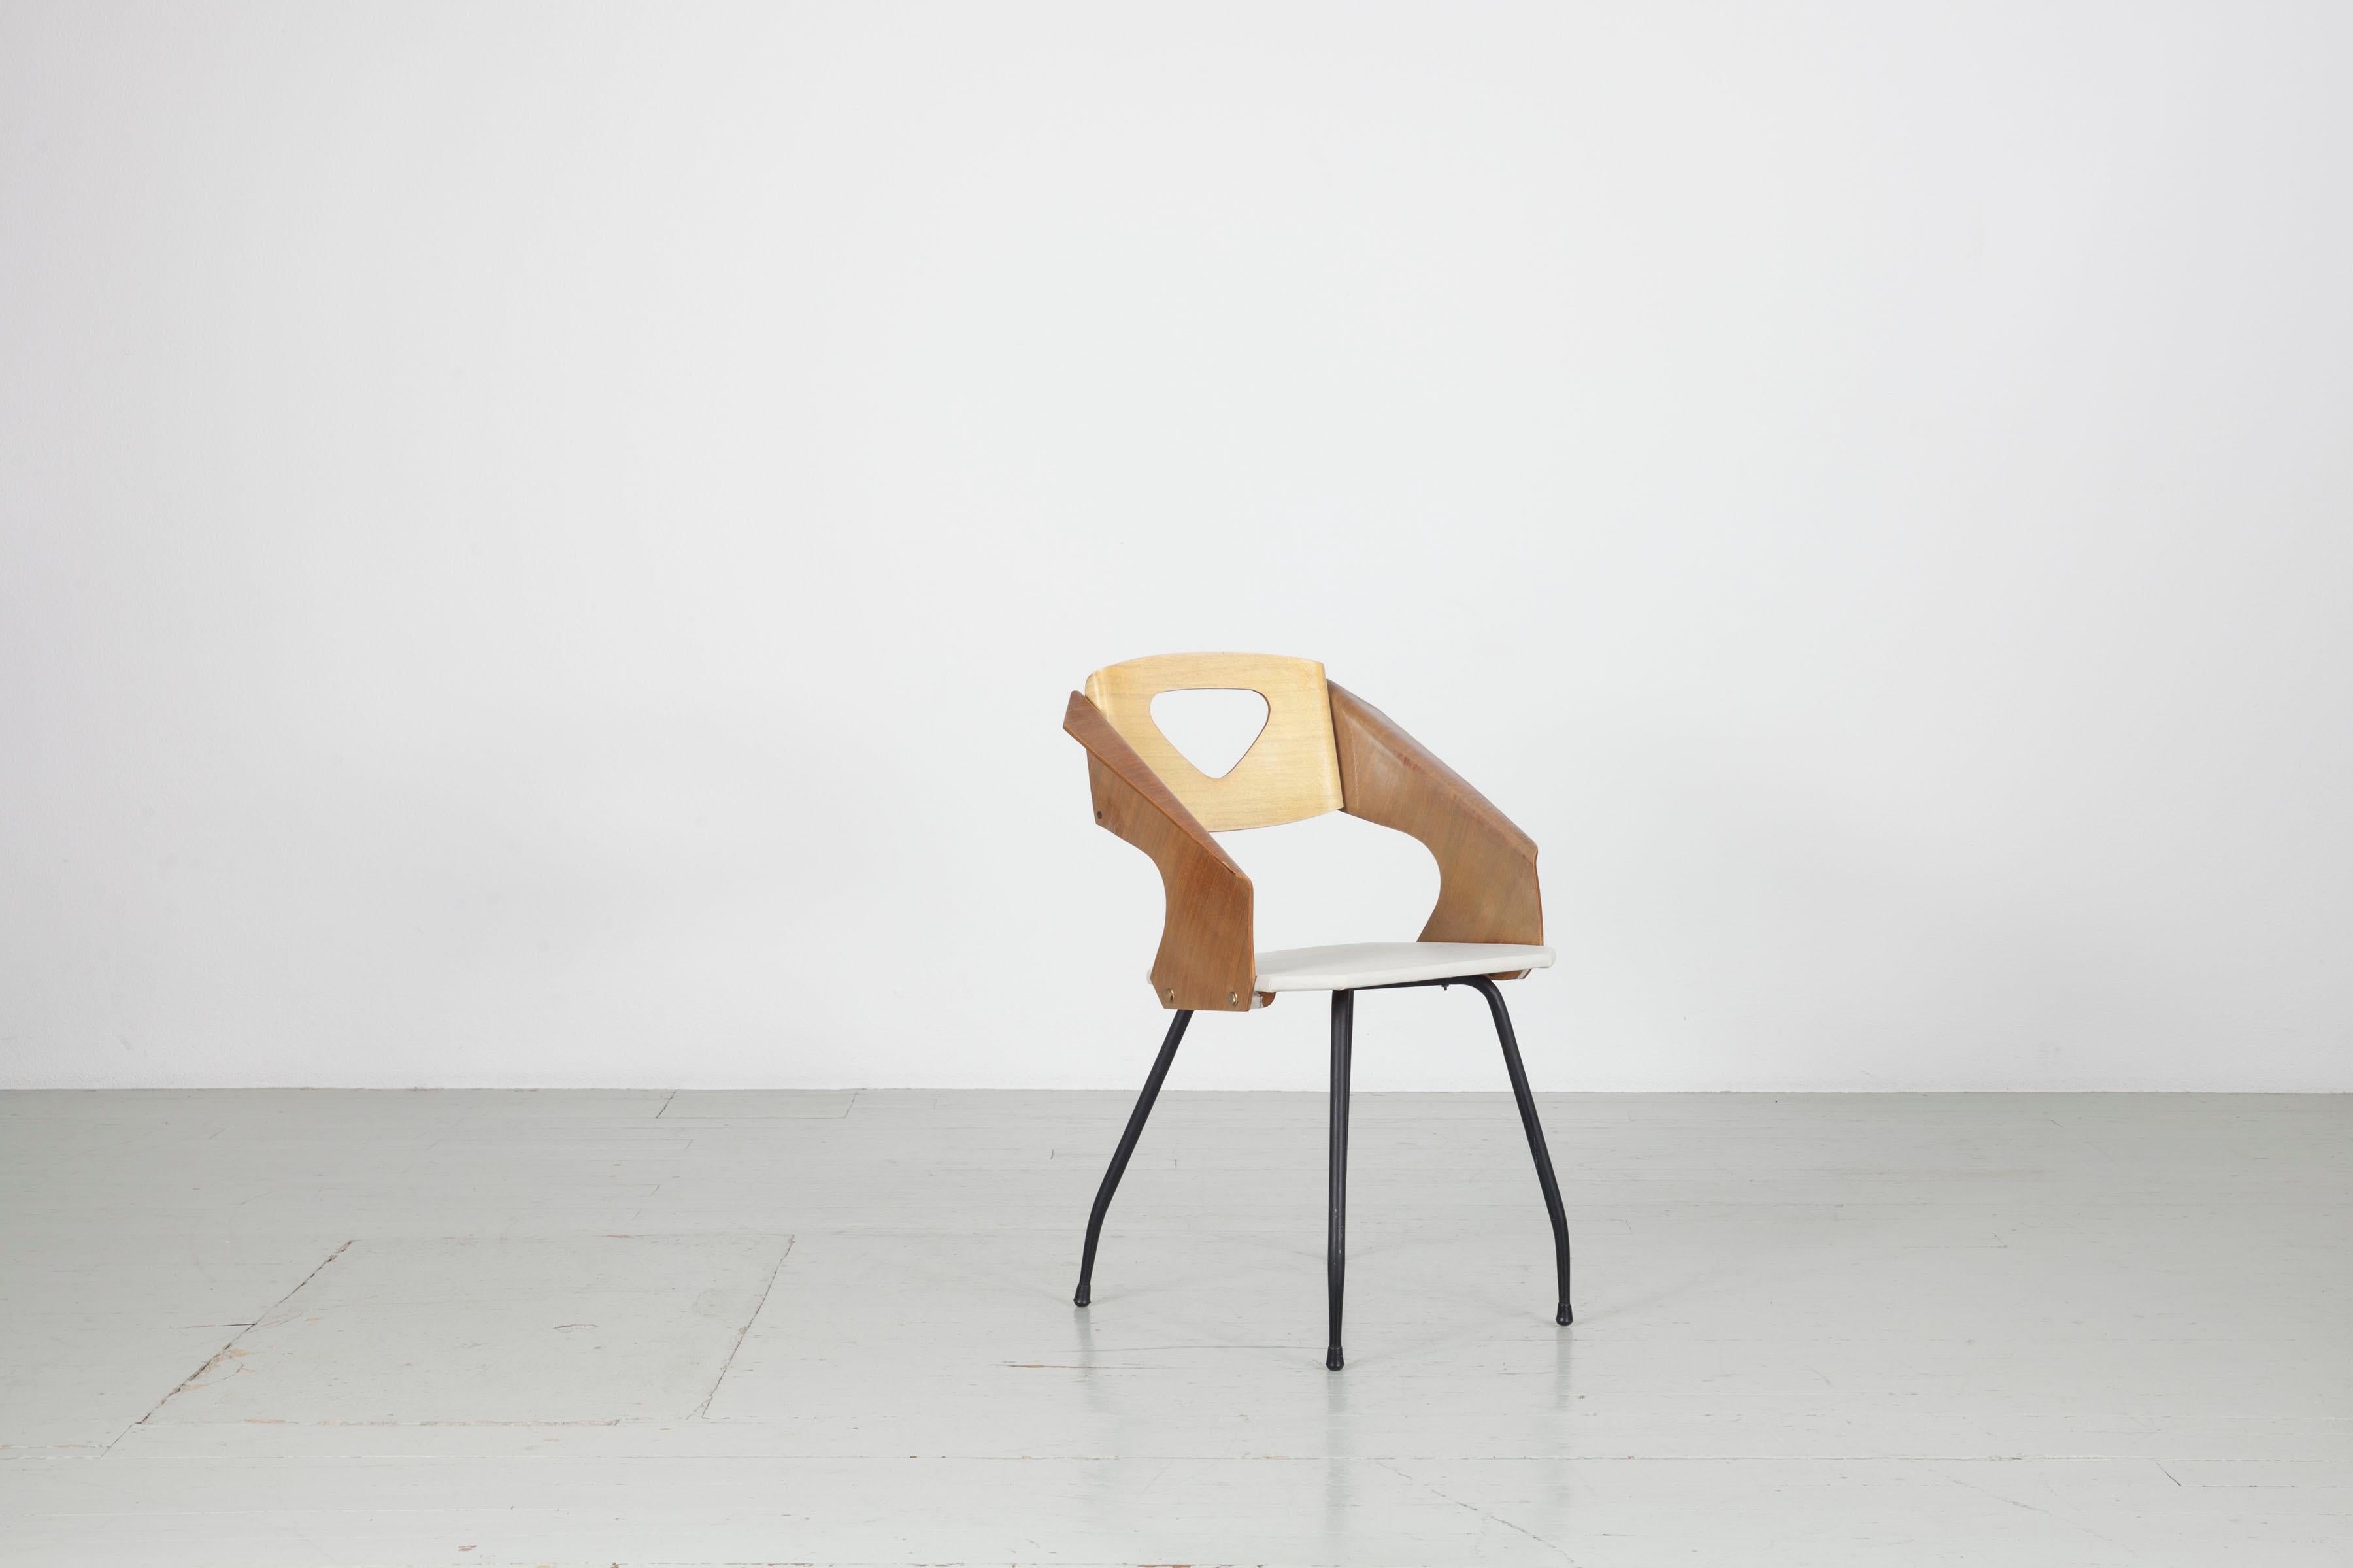 Mid-Century Modern Set of 6 plywood chairs, 1950s, Carlo Ratti, Italy, Industria Legni Curvati For Sale